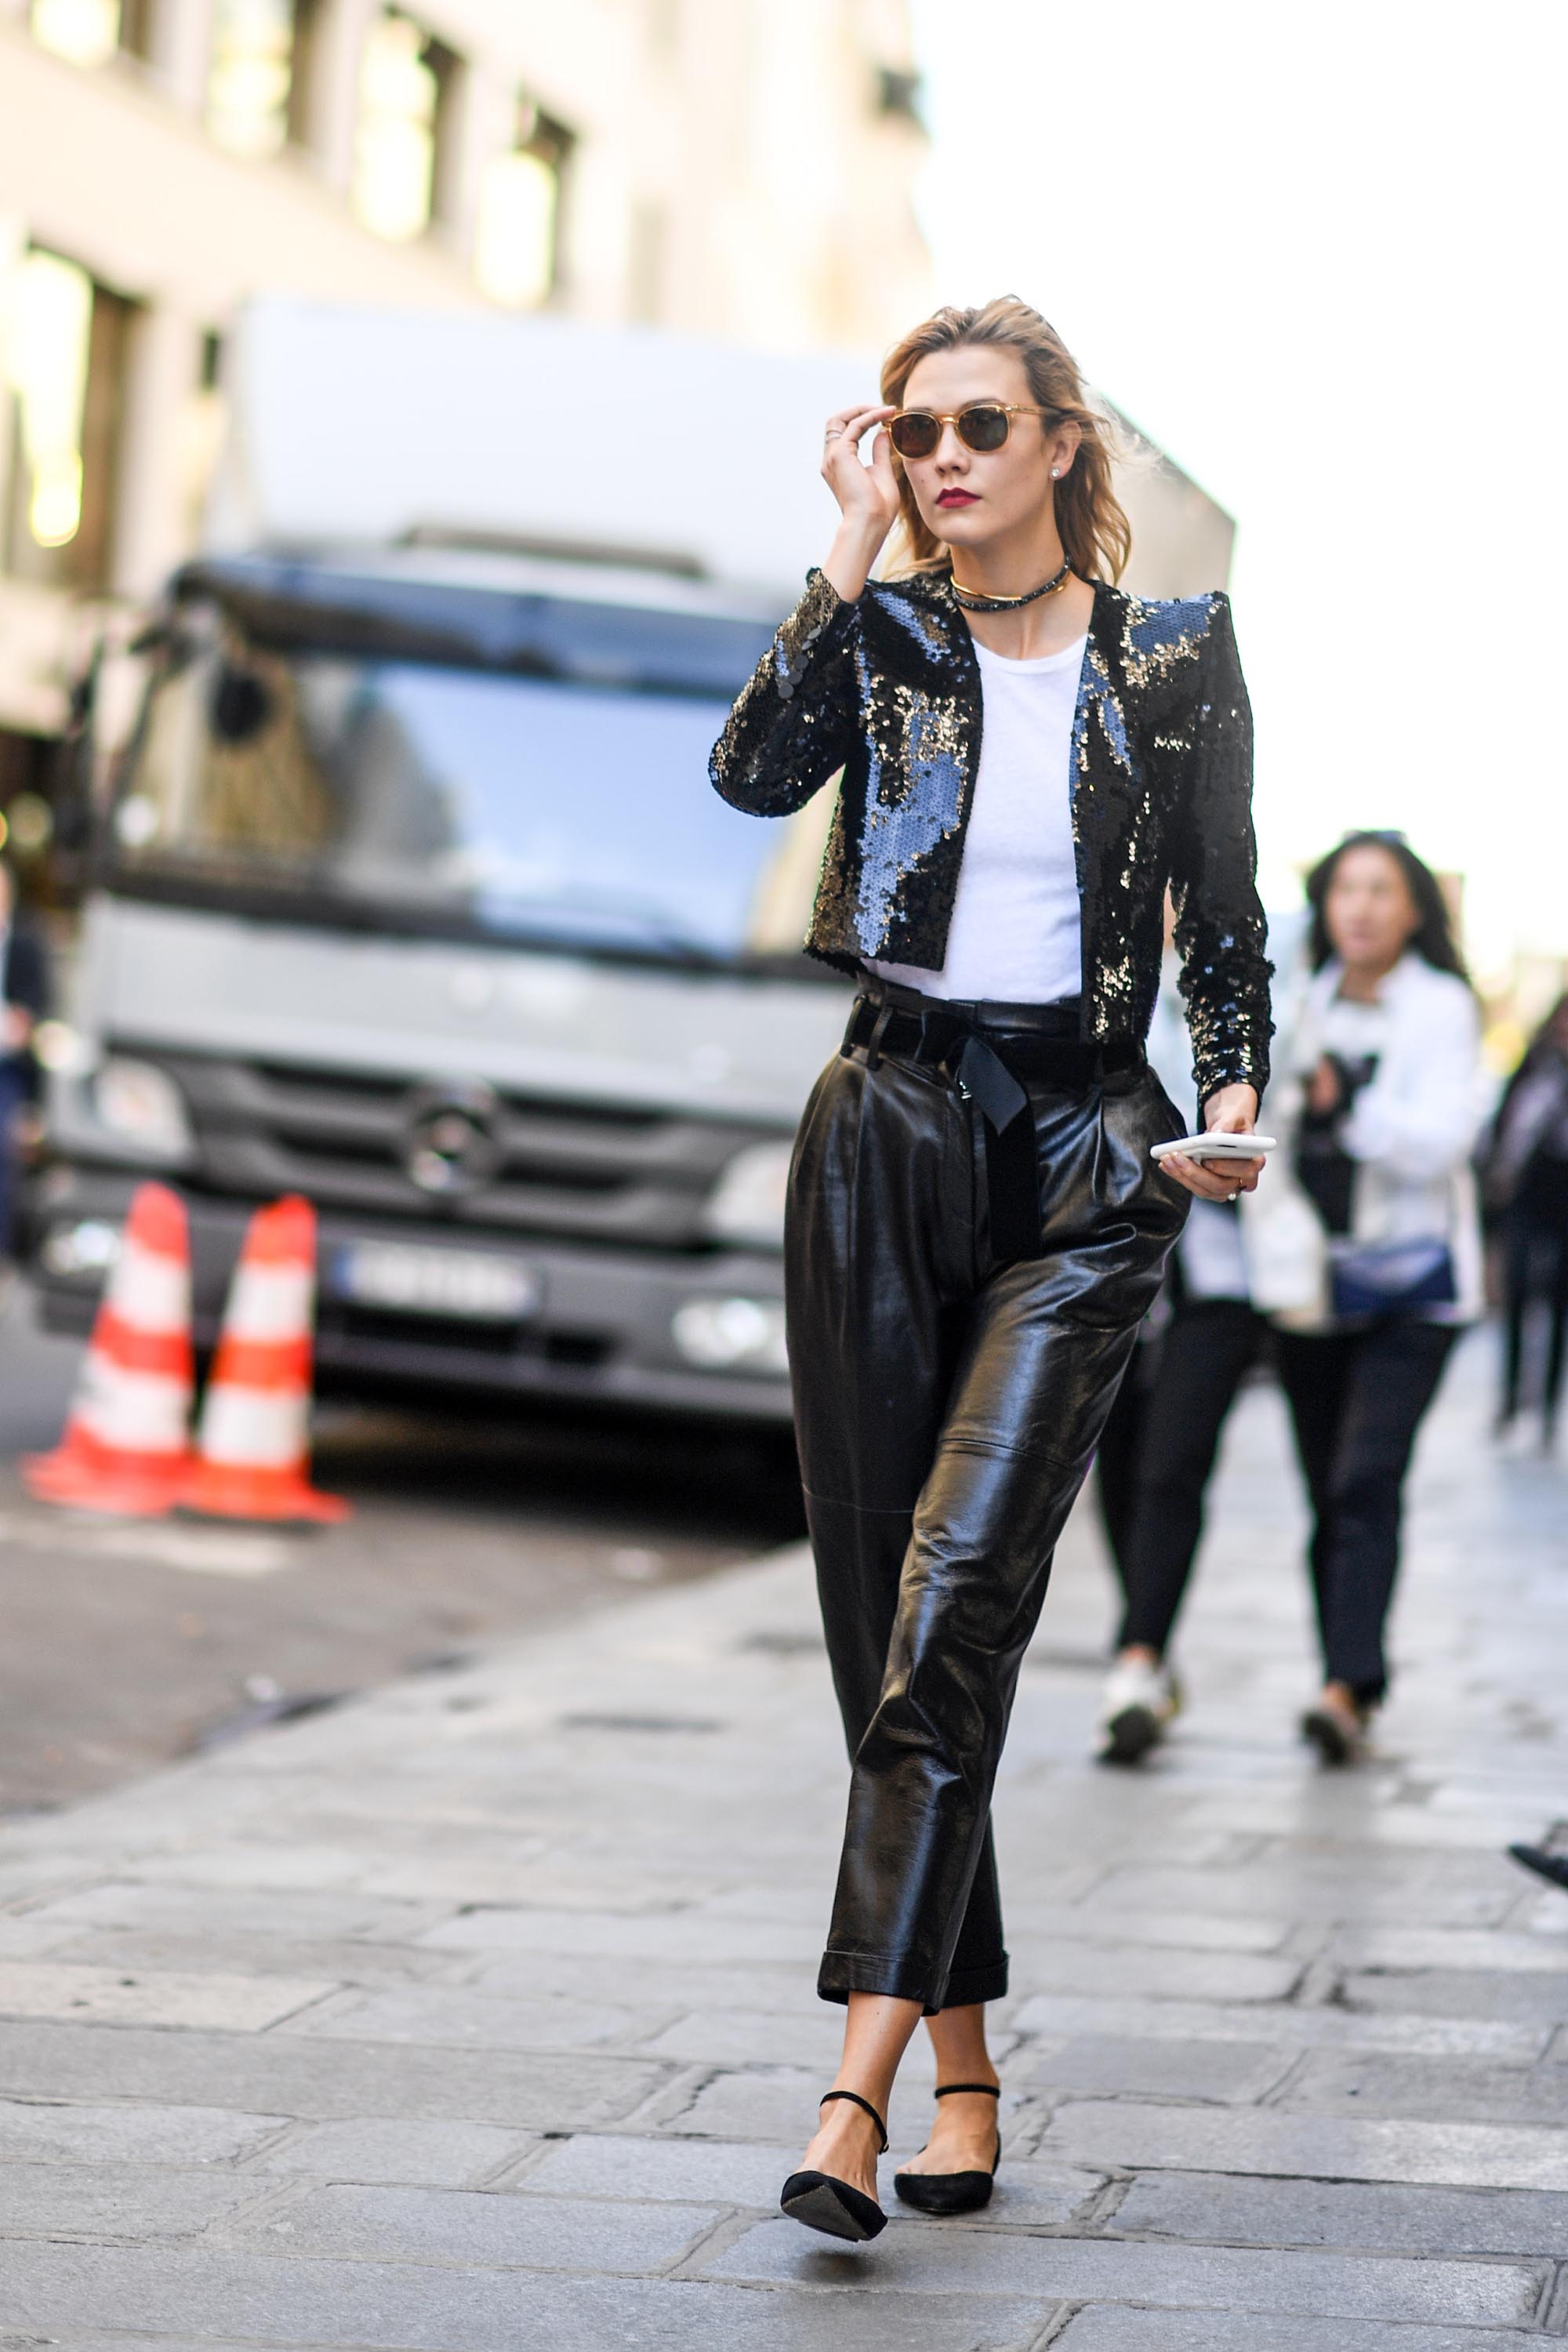 Karlie Kloss out and about in Paris